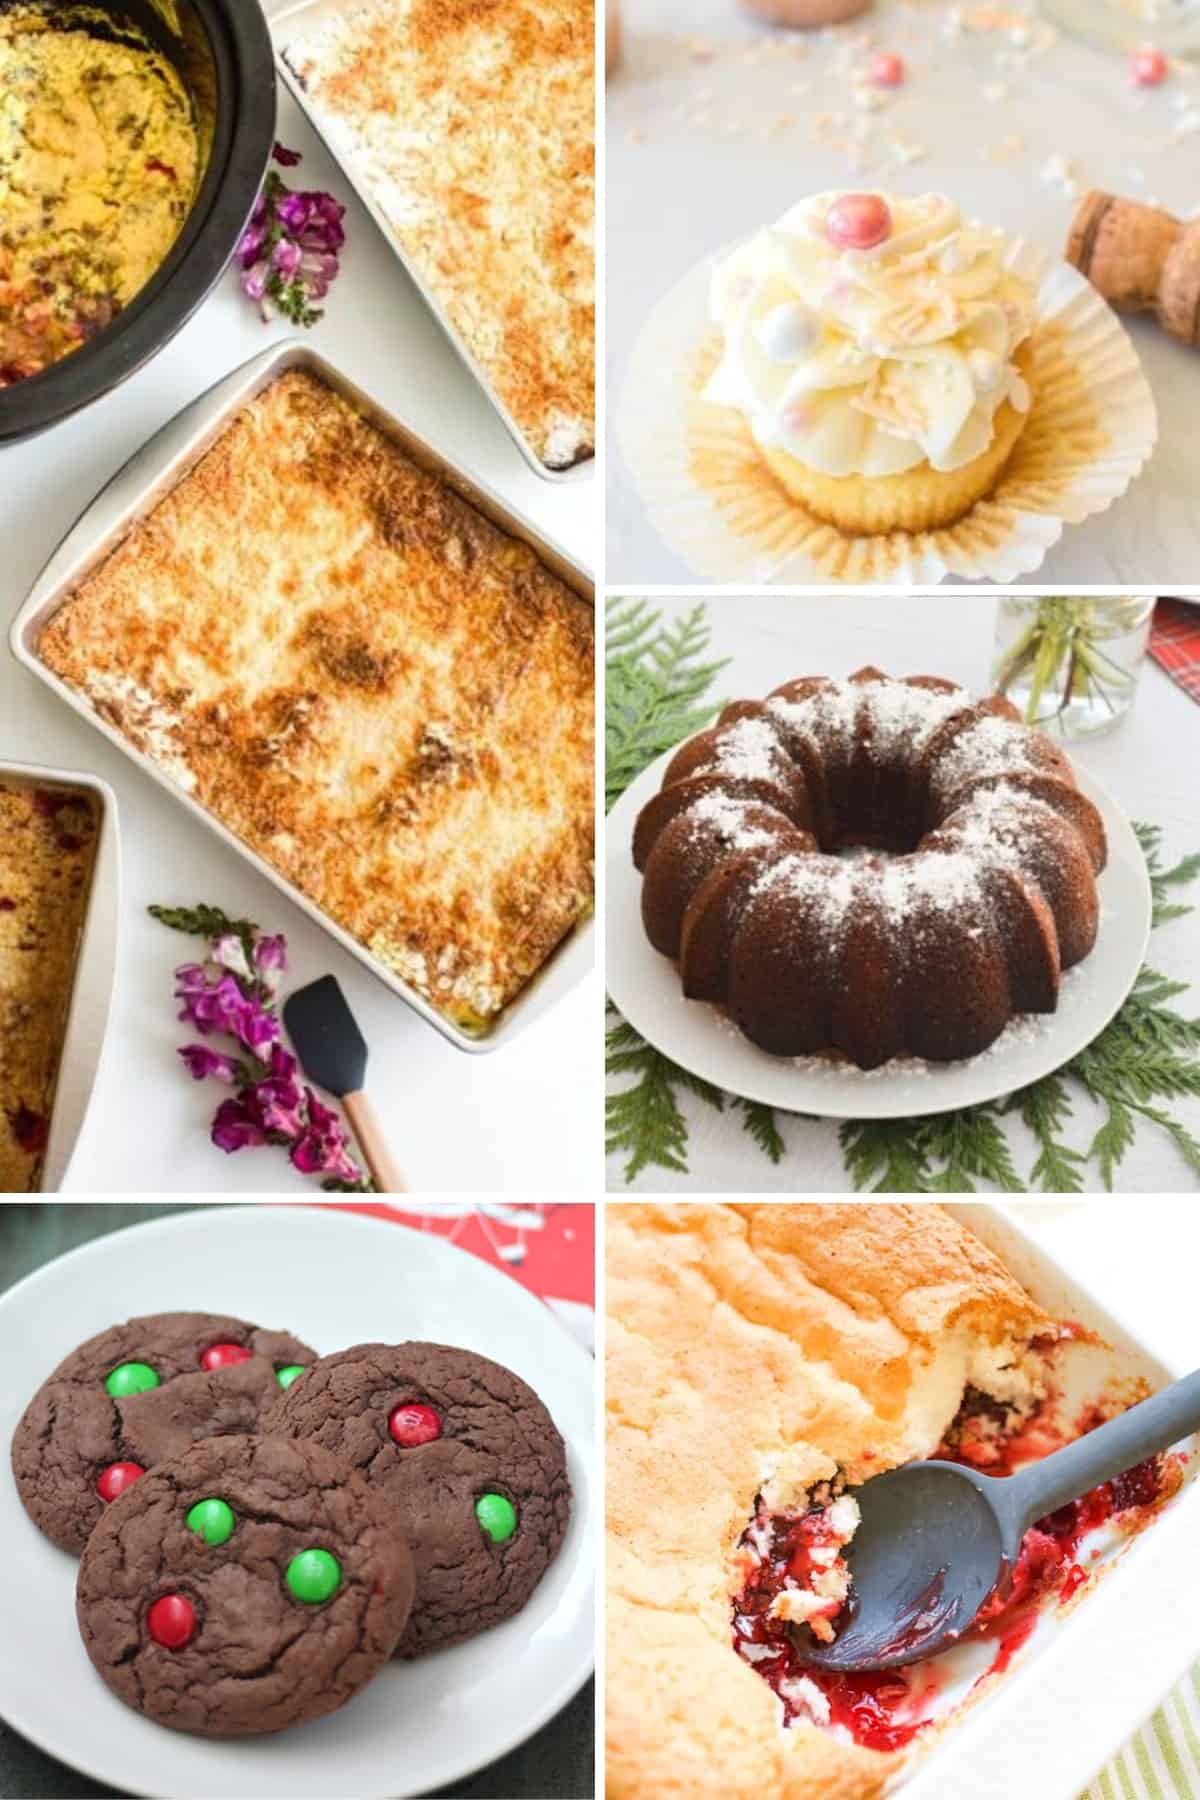 A variety of desserts that can be made with cake mix.